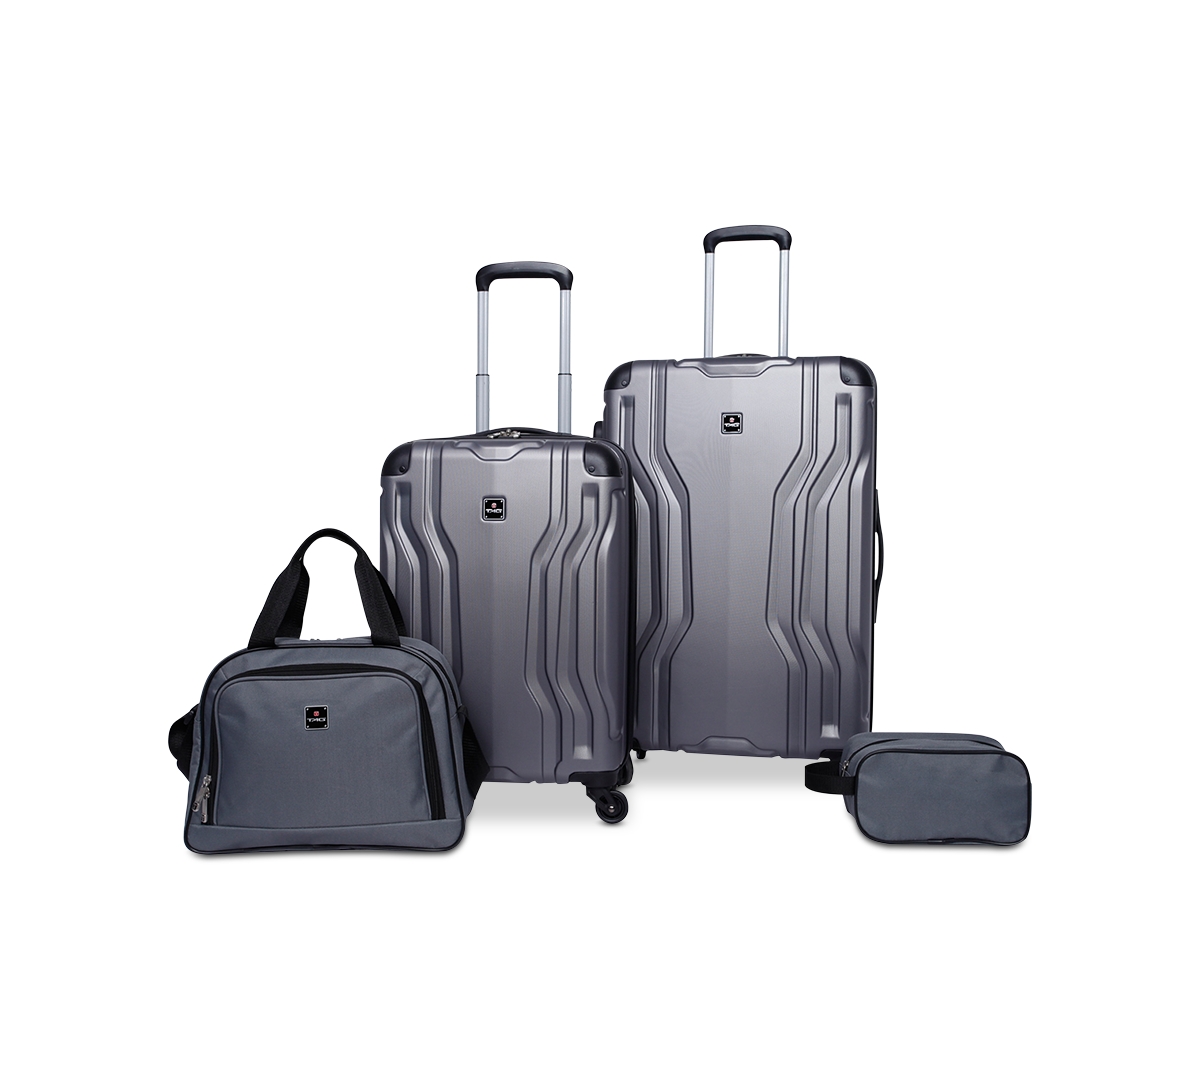 Legacy 4-Pc. Luggage Set, Created for Macy's - Charcoal